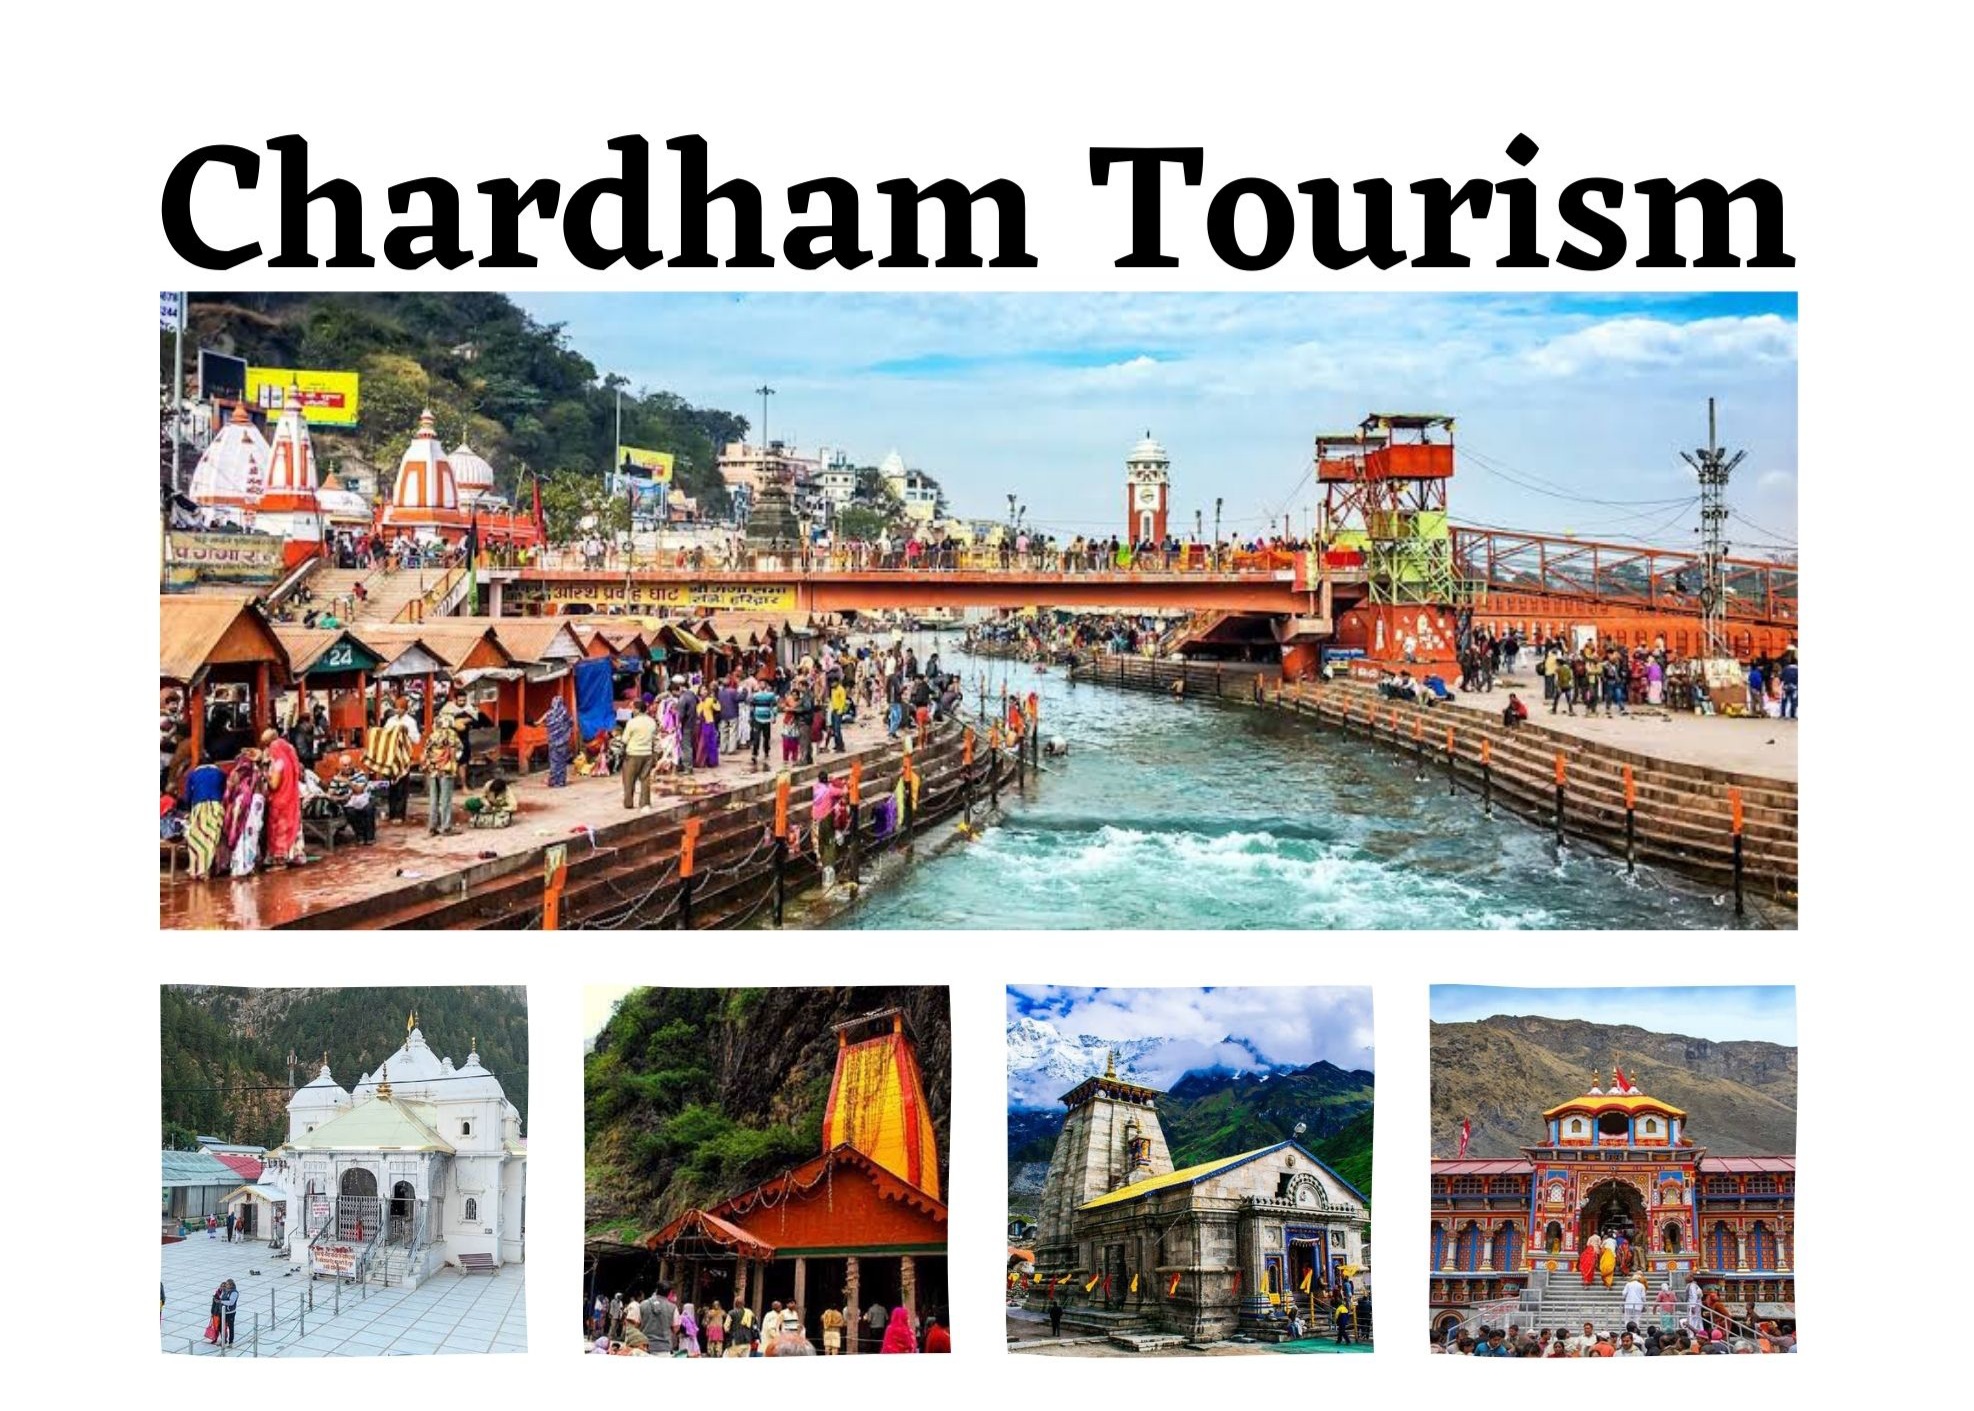 Chardham Yatra booking is still available